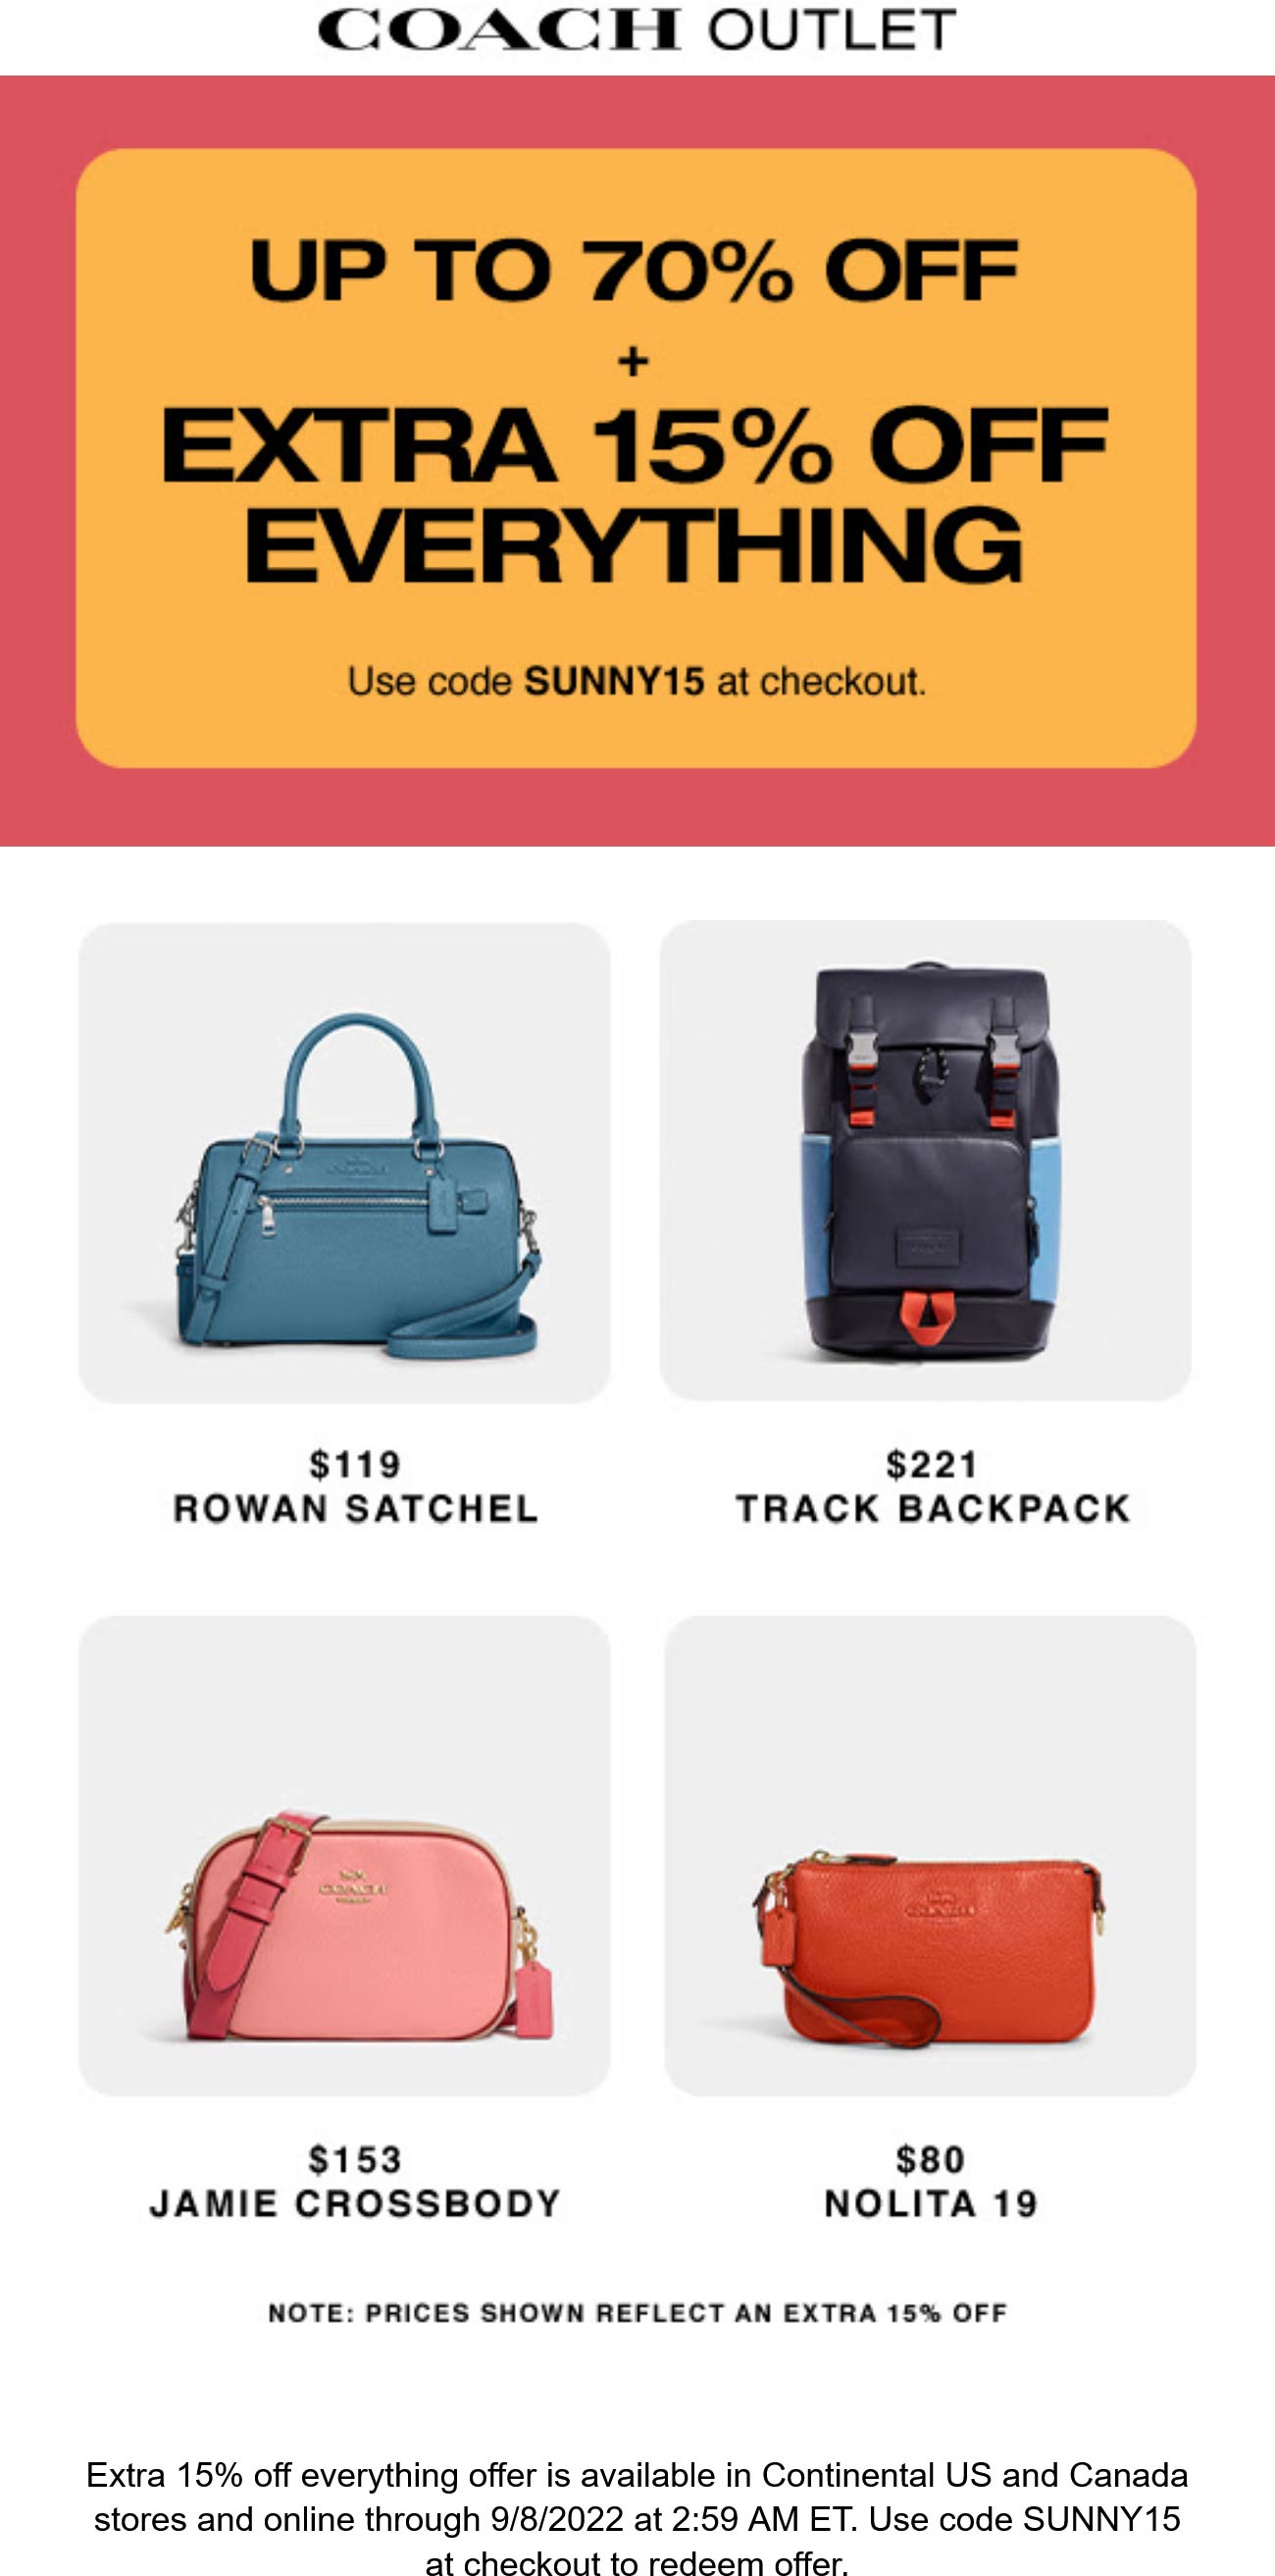 Coach Outlet stores Coupon  Extra 15% off everything today at Coach Outlet via promo code SUNNY15 #coachoutlet 